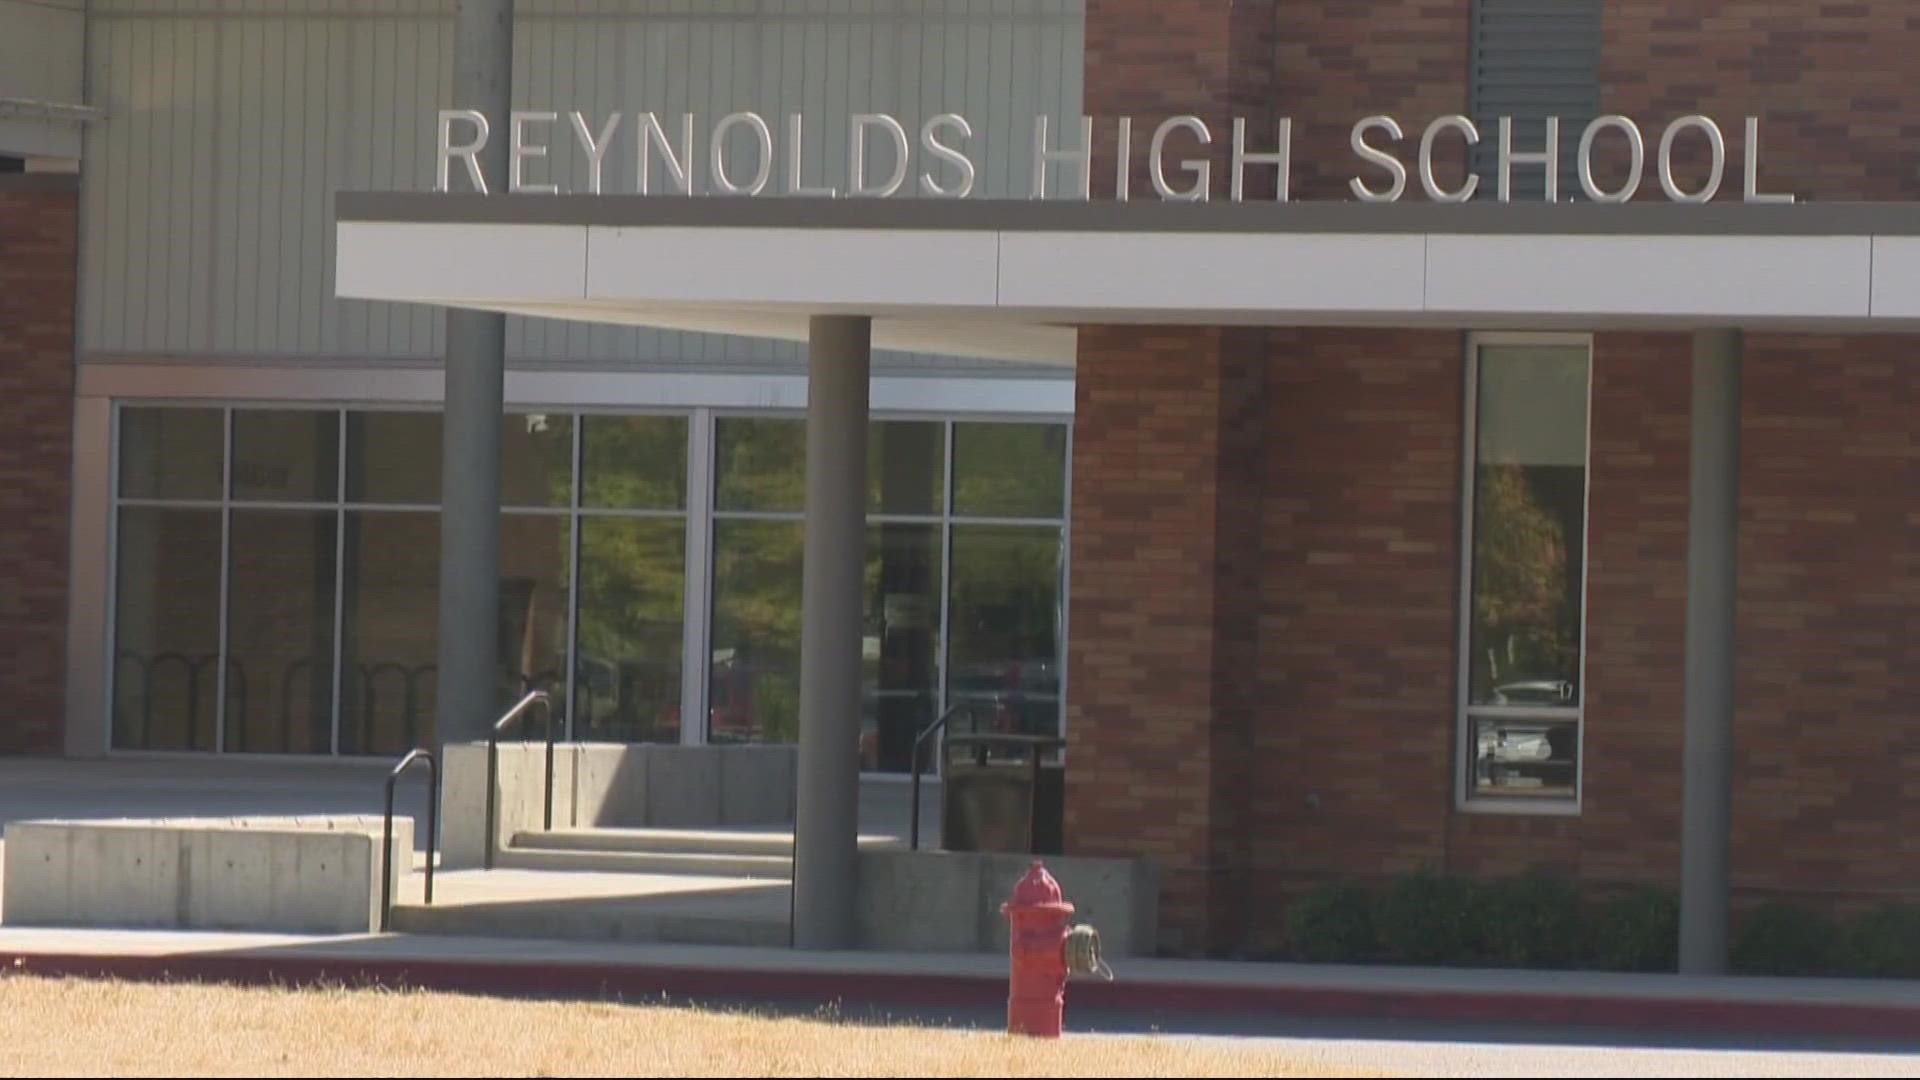 Reynolds High School parent Cheri Shrake unenrolled her daughter this week amid concerns that classrooms were being left unsupervised.